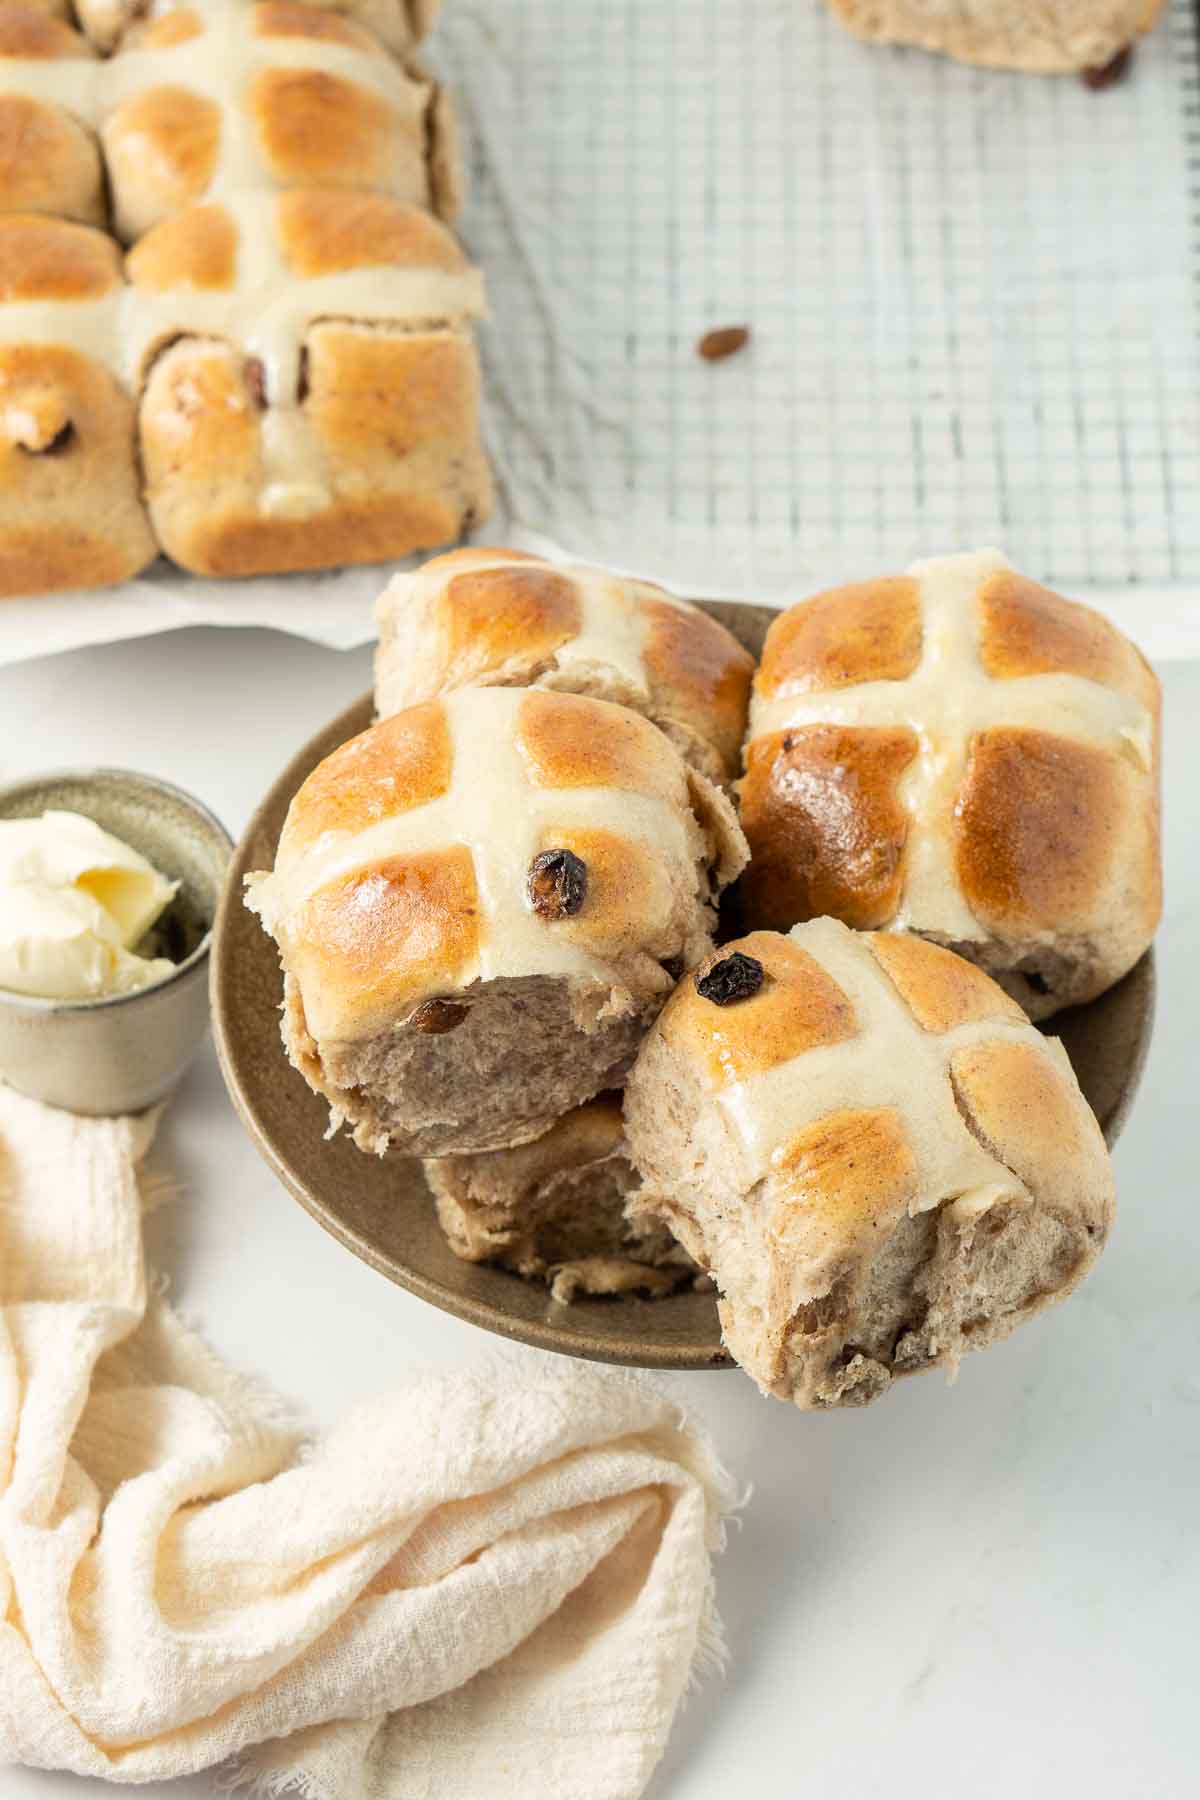 Hot cross buns in a bowl.